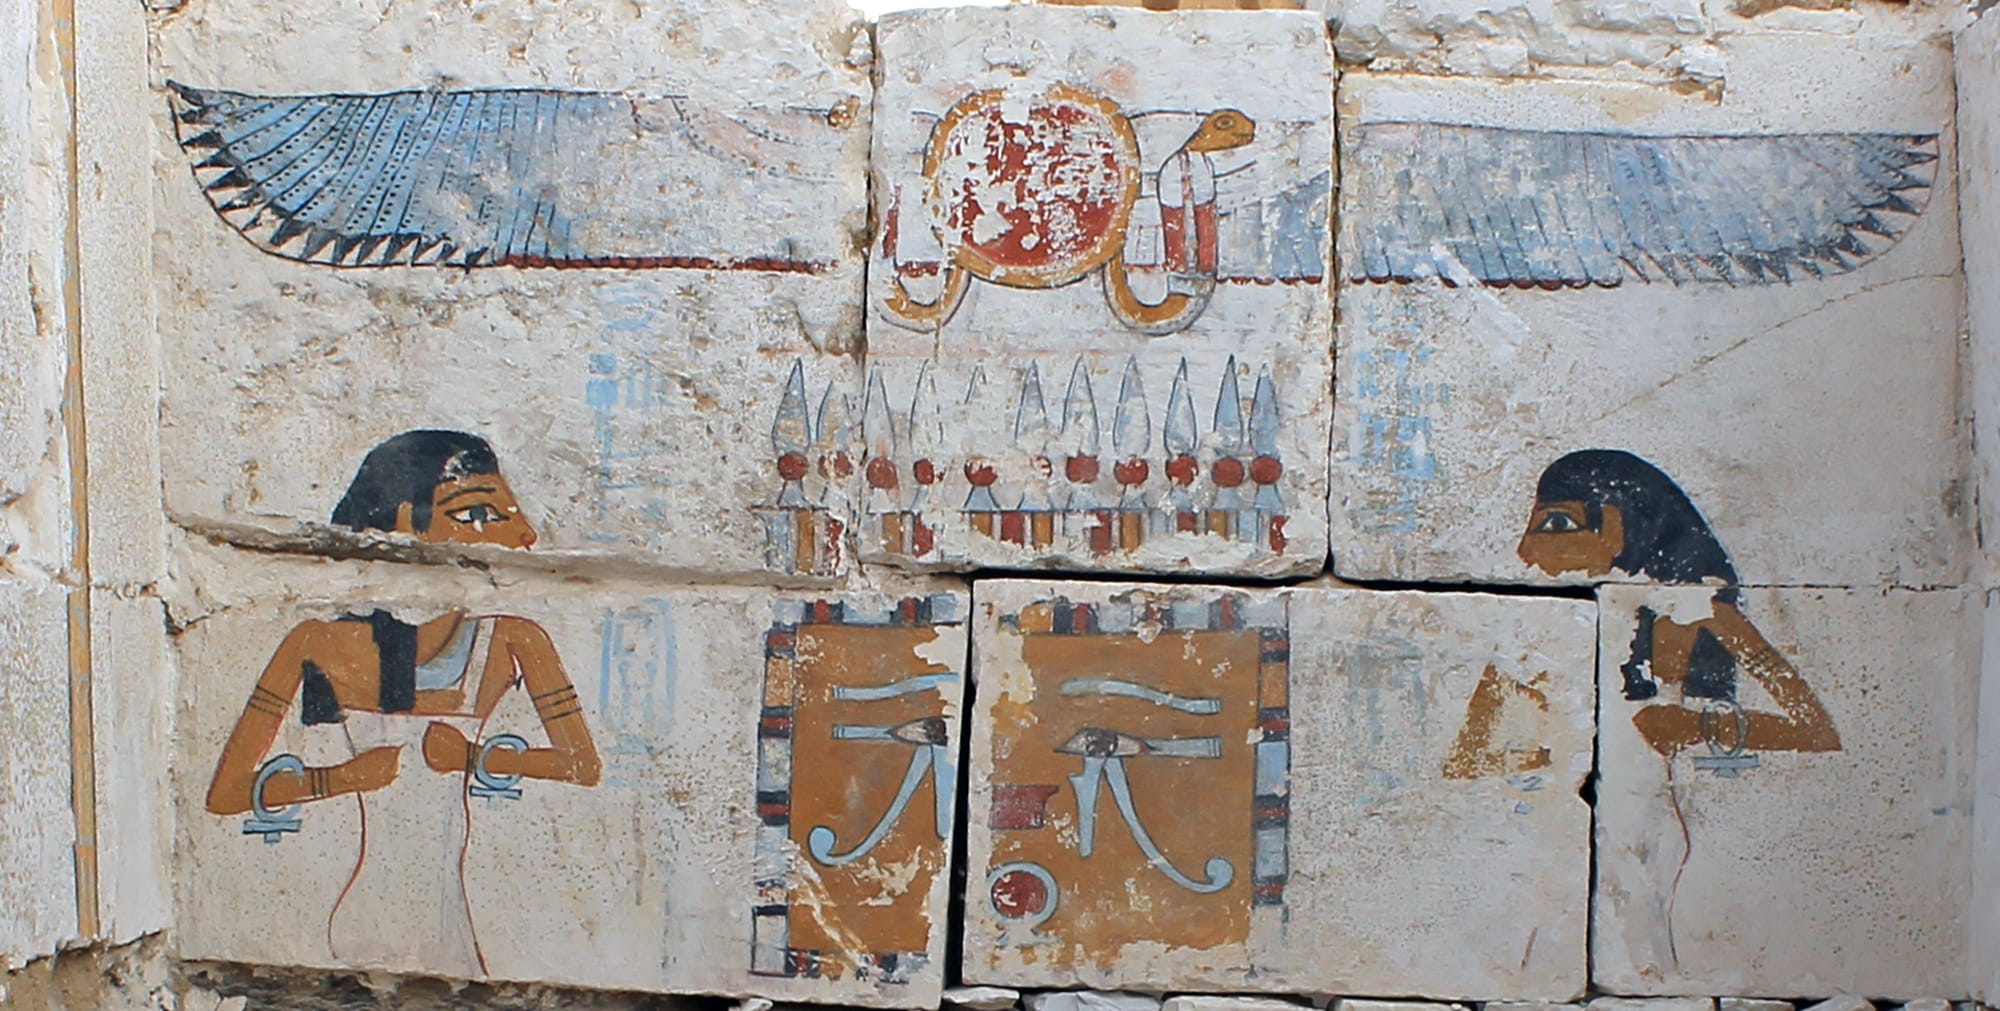 In a painted scene, the goddesses Neith and Nut protect the shrine of the pharaoh Woseribre-Senebkay.